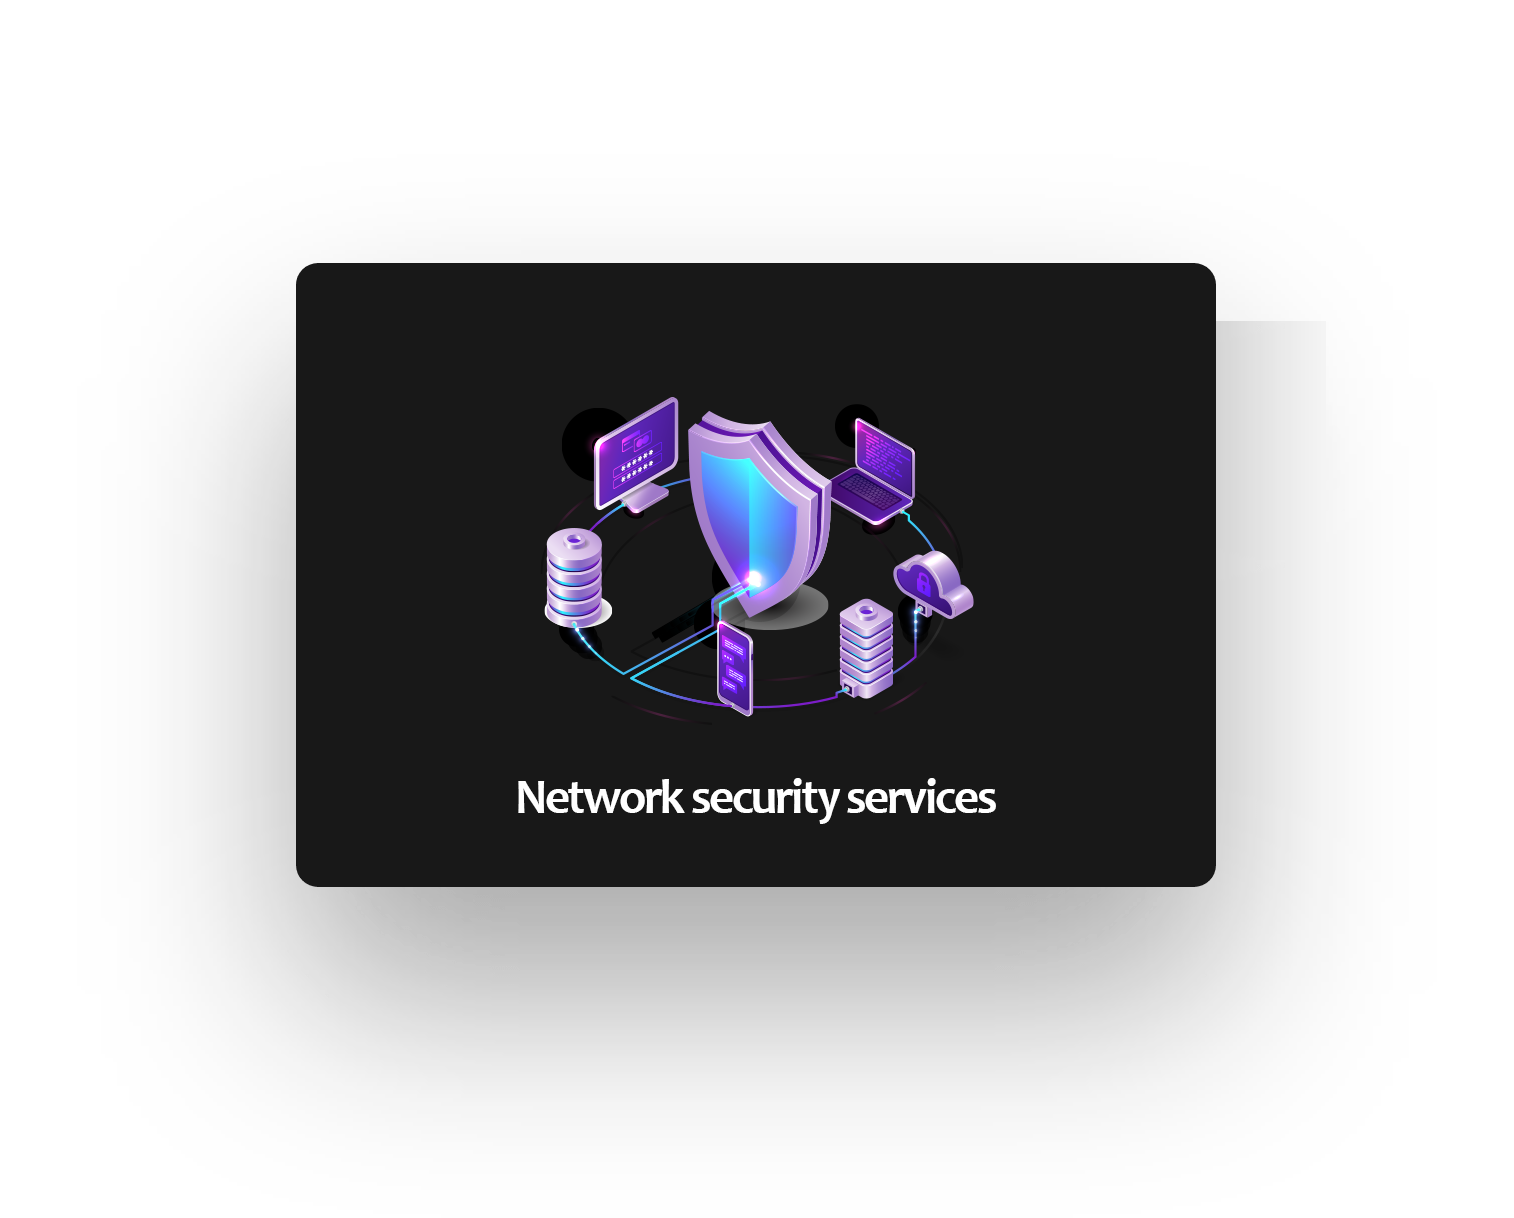 Network security services